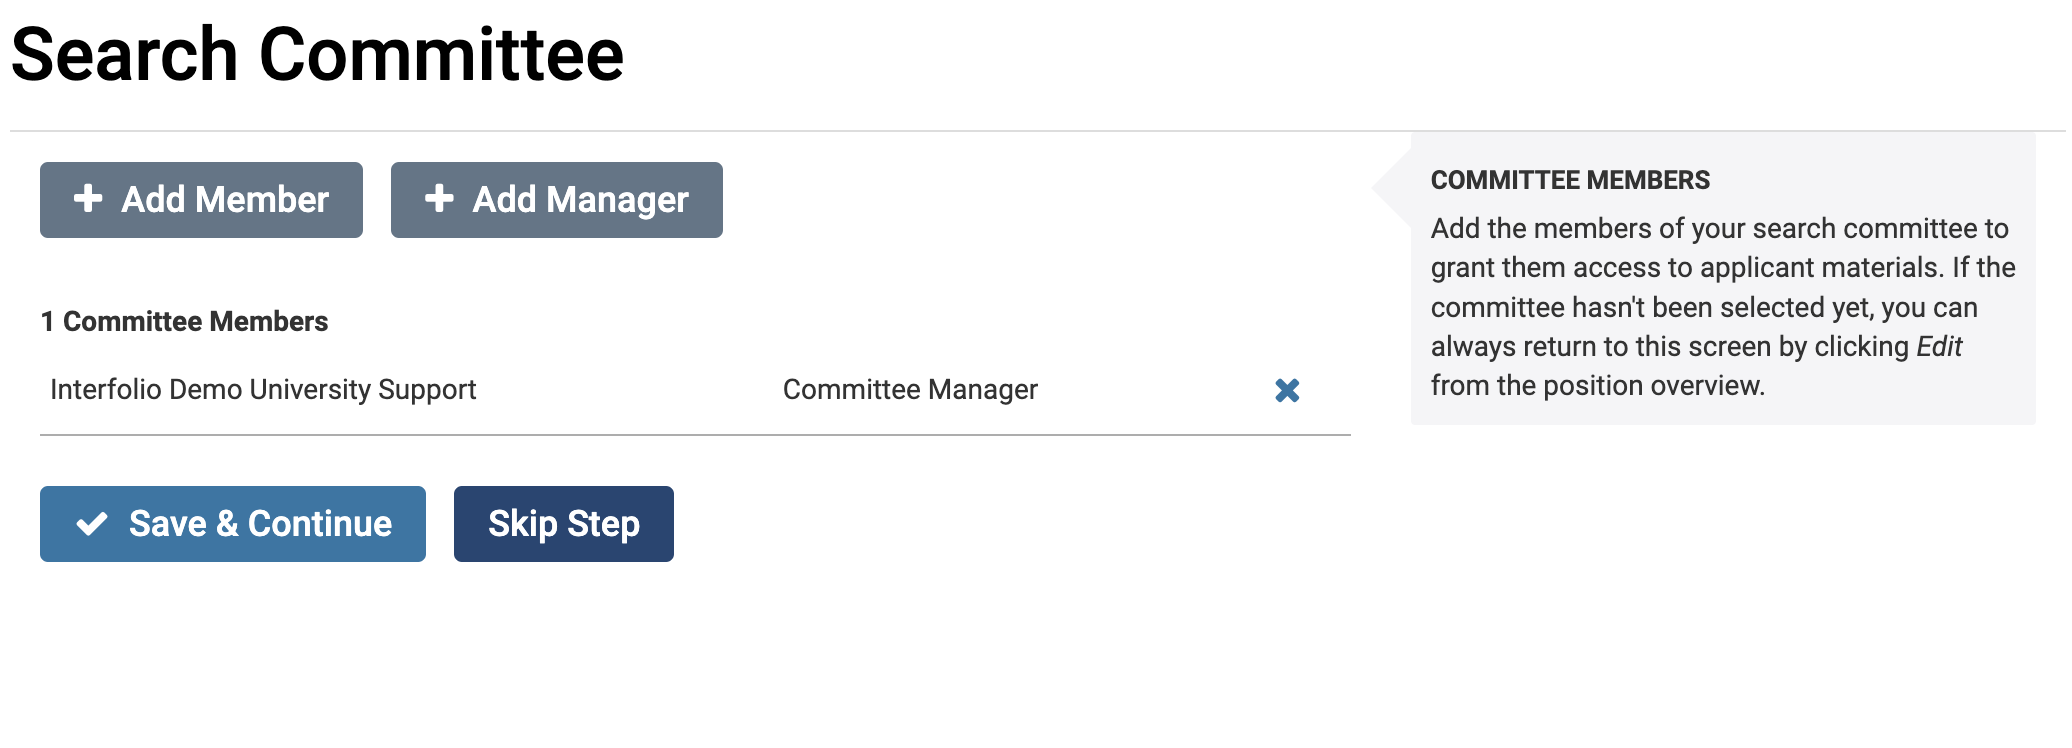 Search Committee section with Add Member and Add Manager button below